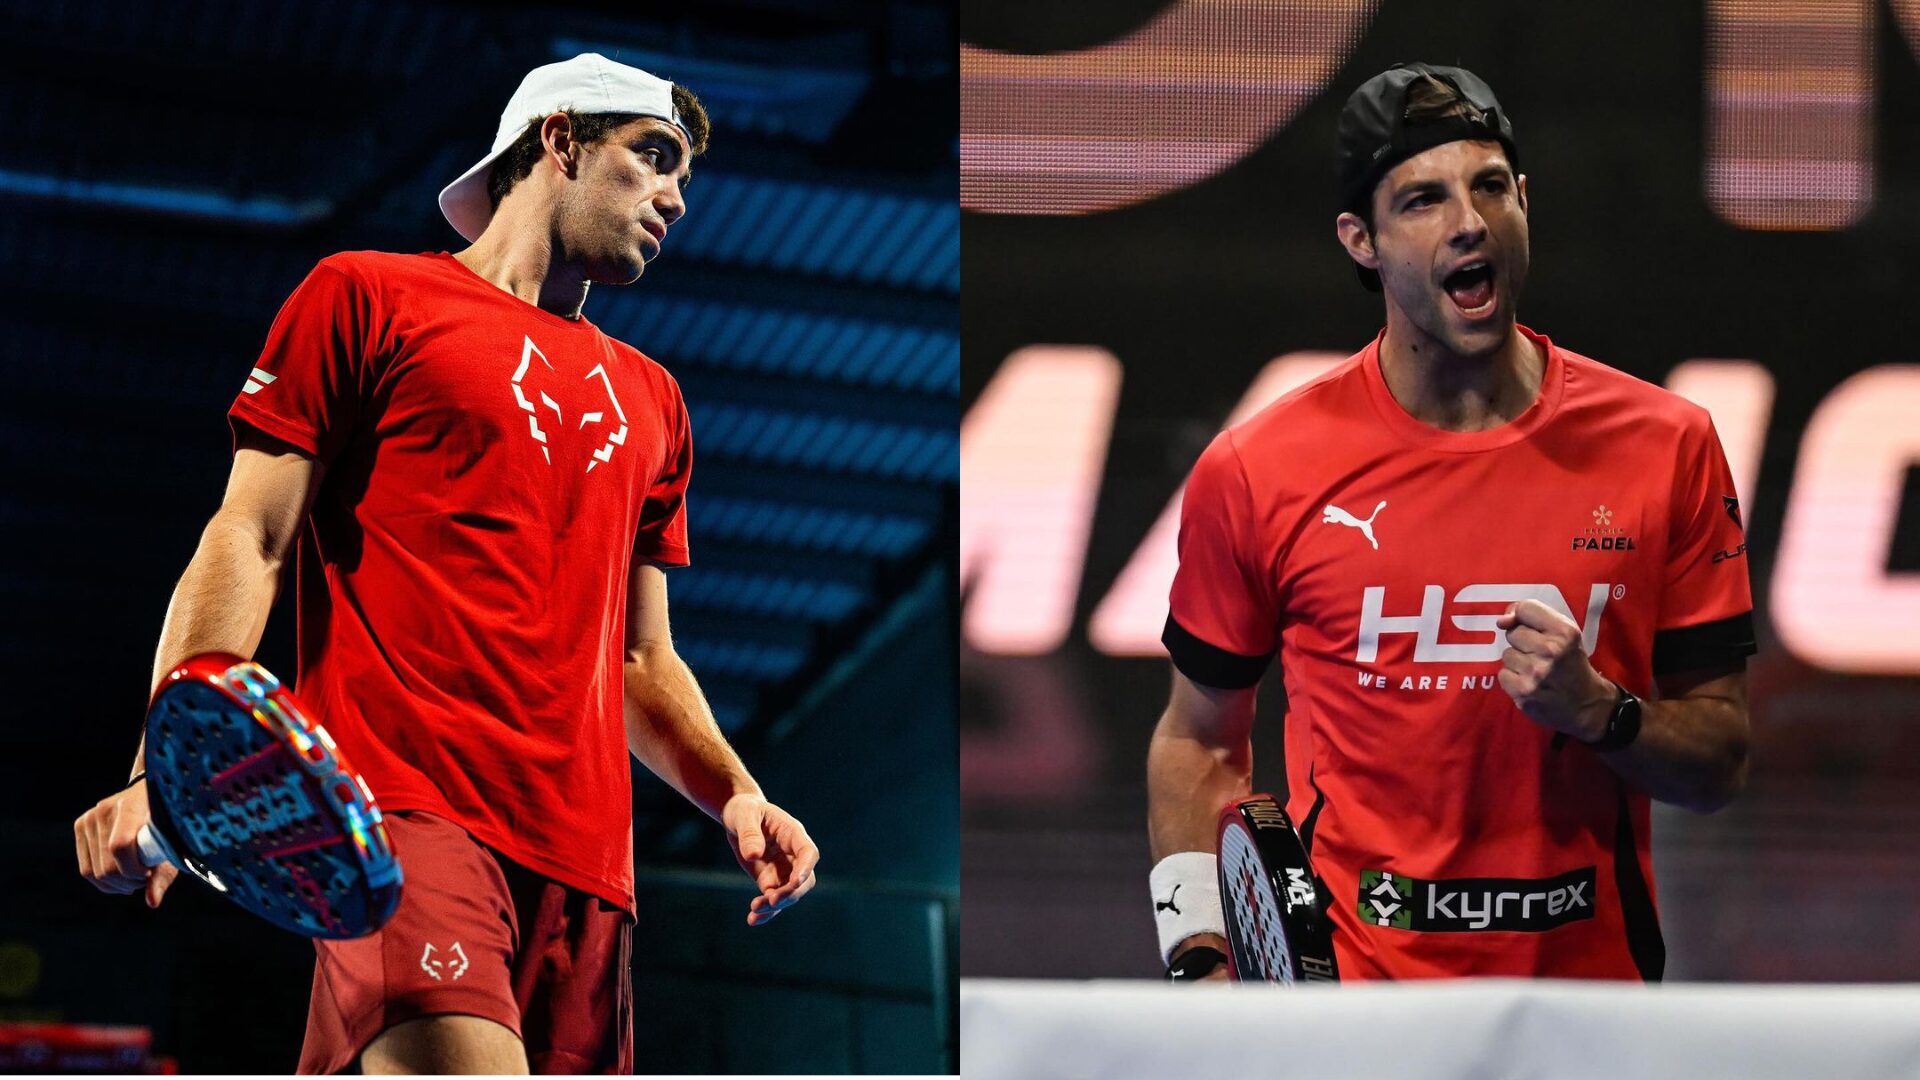 Official: Lebron and Momo registered together in the Premier Padel Puerto Cabello P2